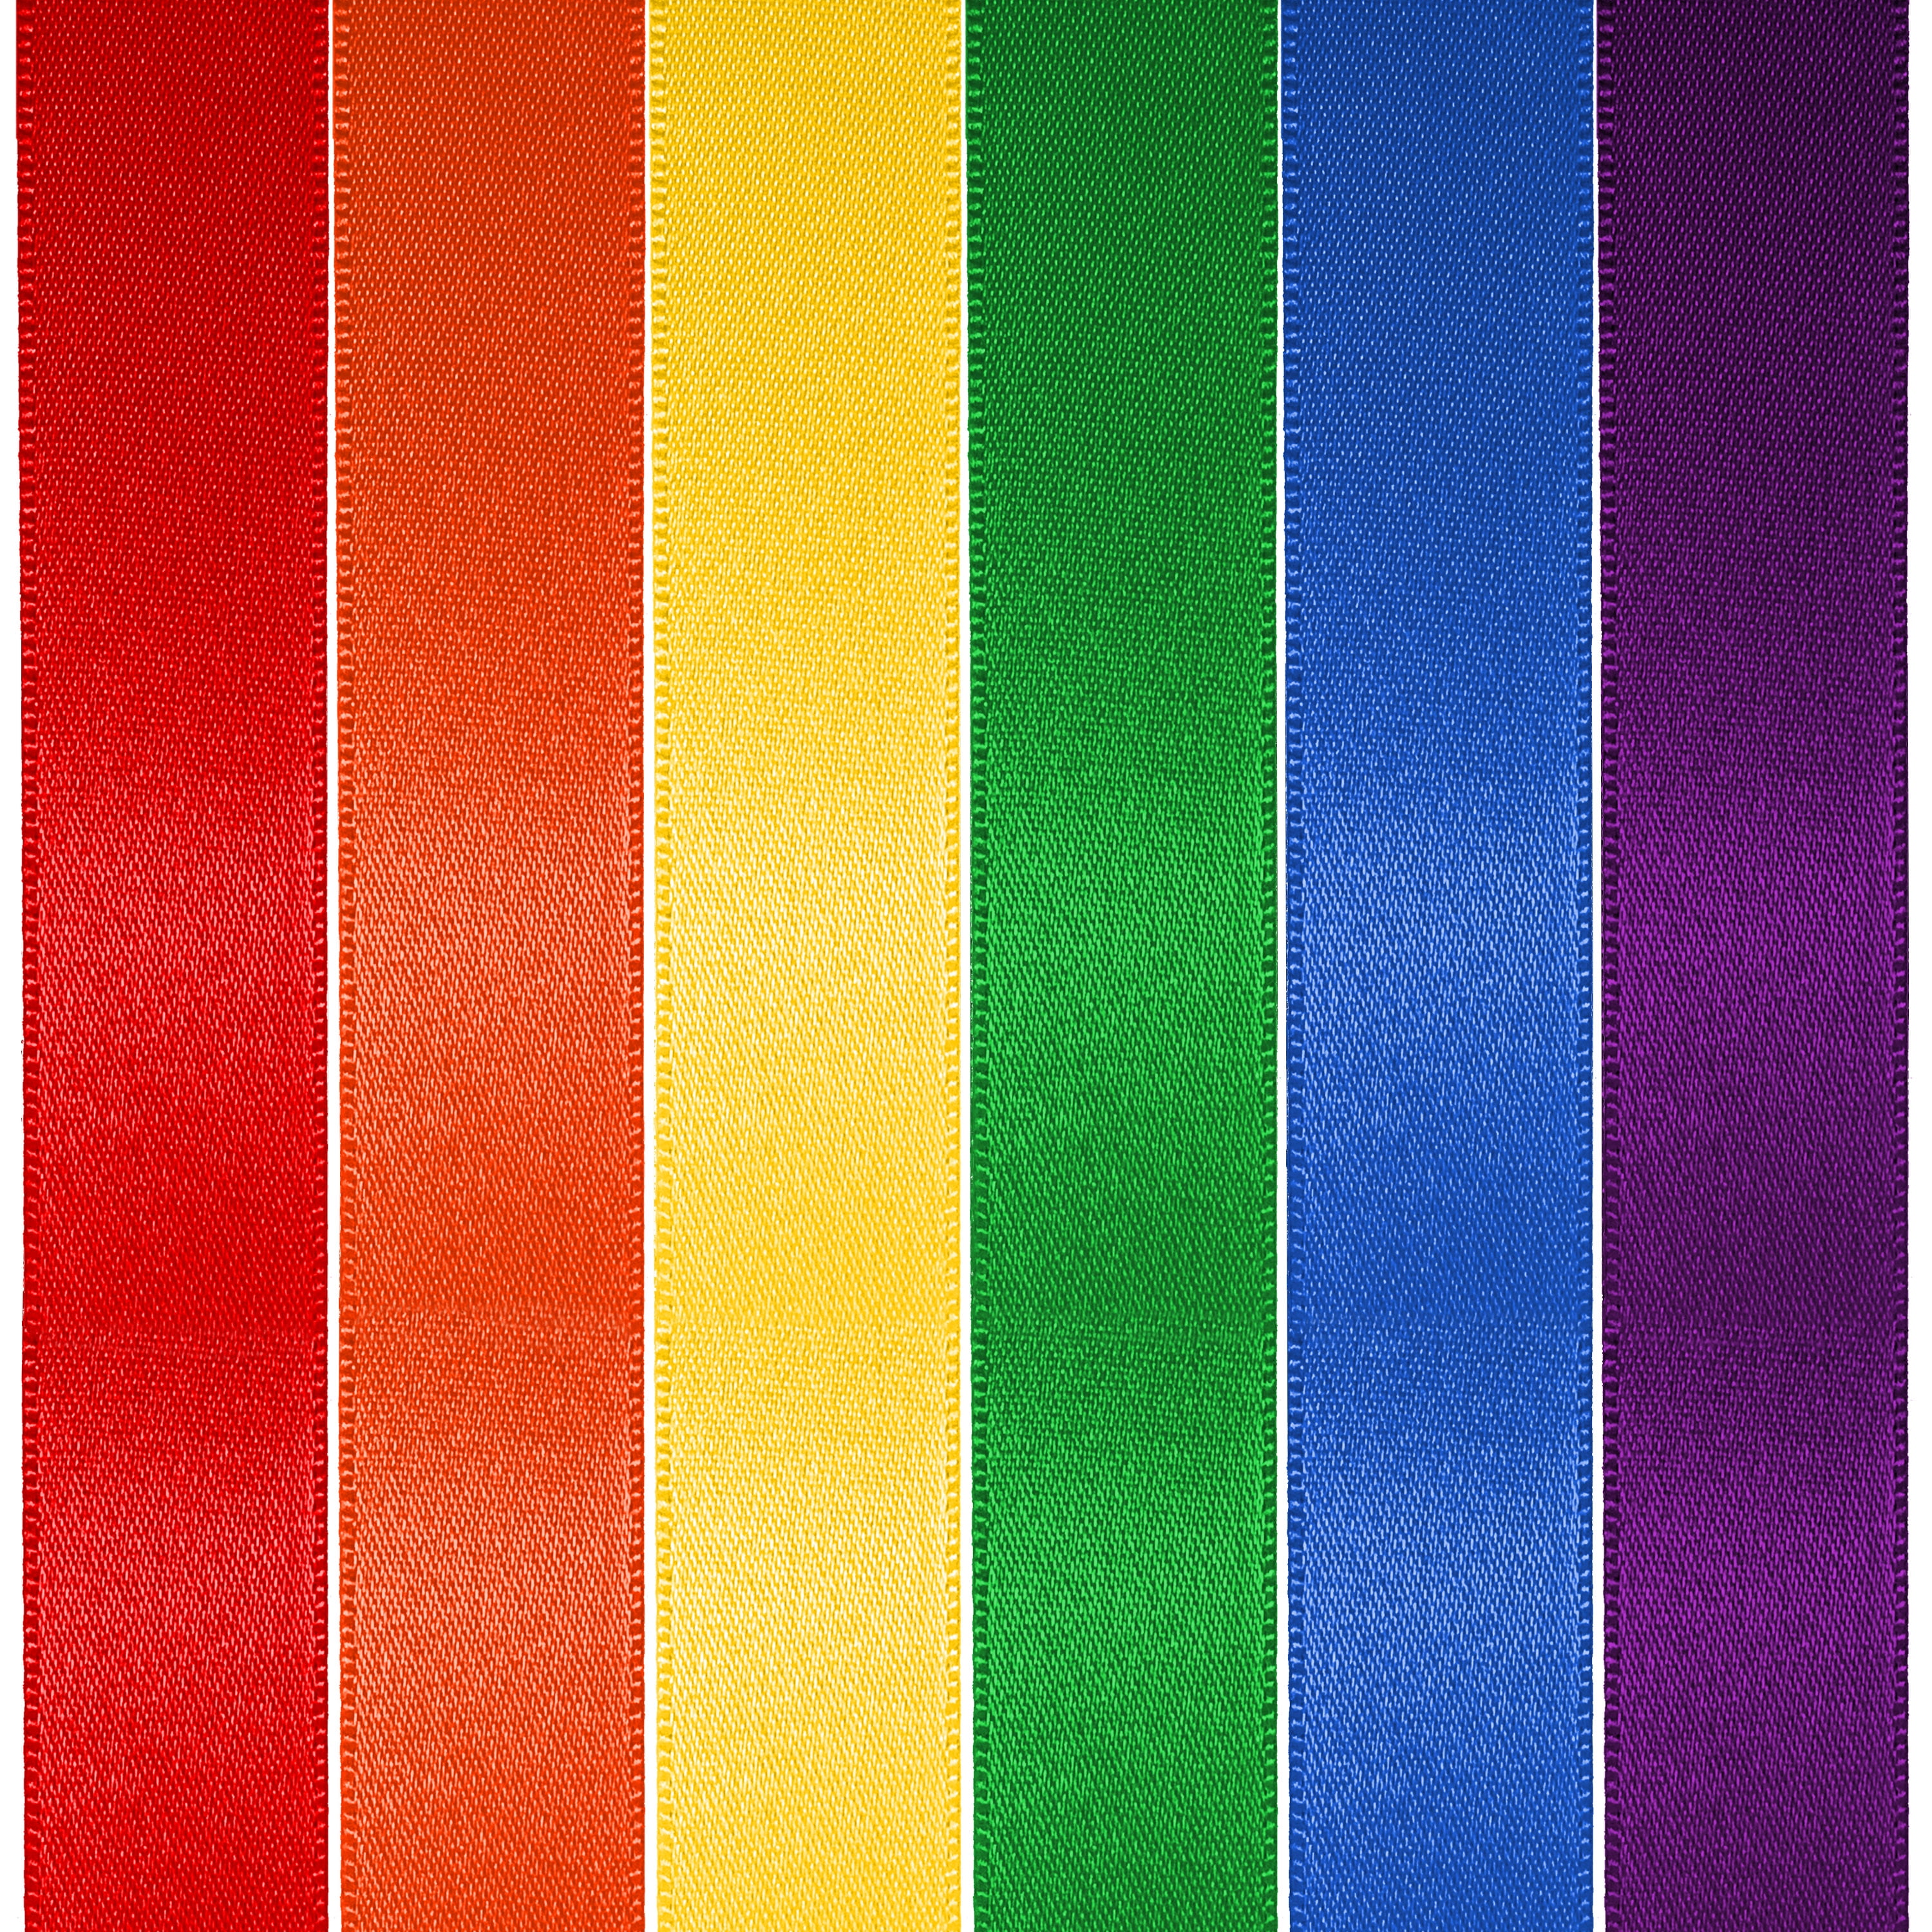 Double Faced Satin Rainbow Ribbon Pack, 6 Colors, 3/8 inch x 600 Yards by Gwen Studios